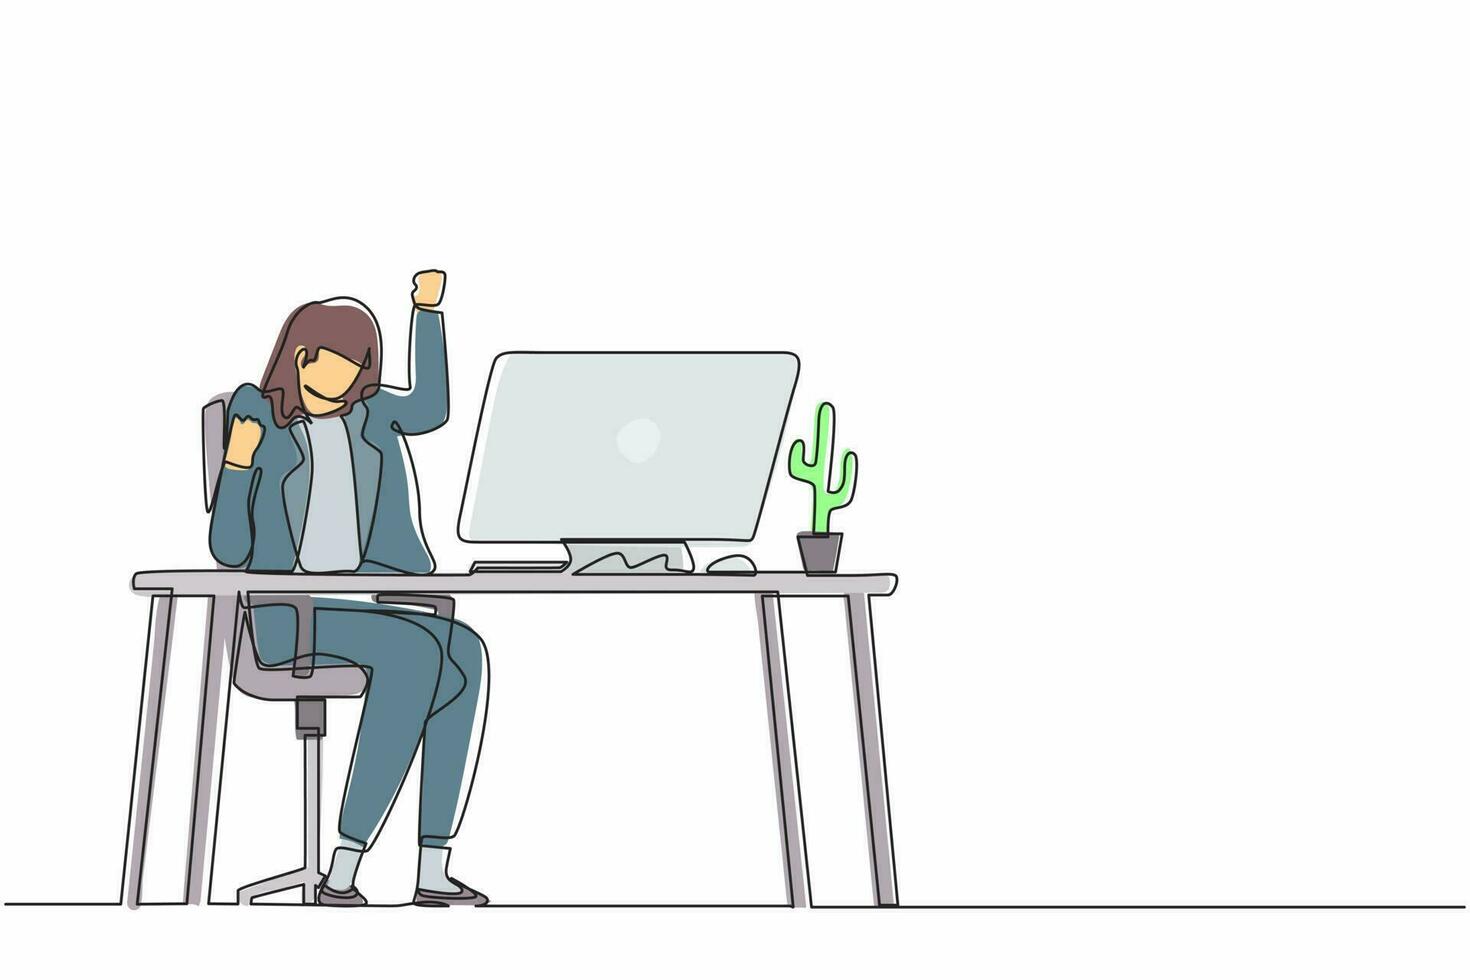 Single one line drawing happy businesswoman sitting on workplace with raised one hand high and raised the other. Worker celebrates salary increase from company. Continuous line design graphic vector